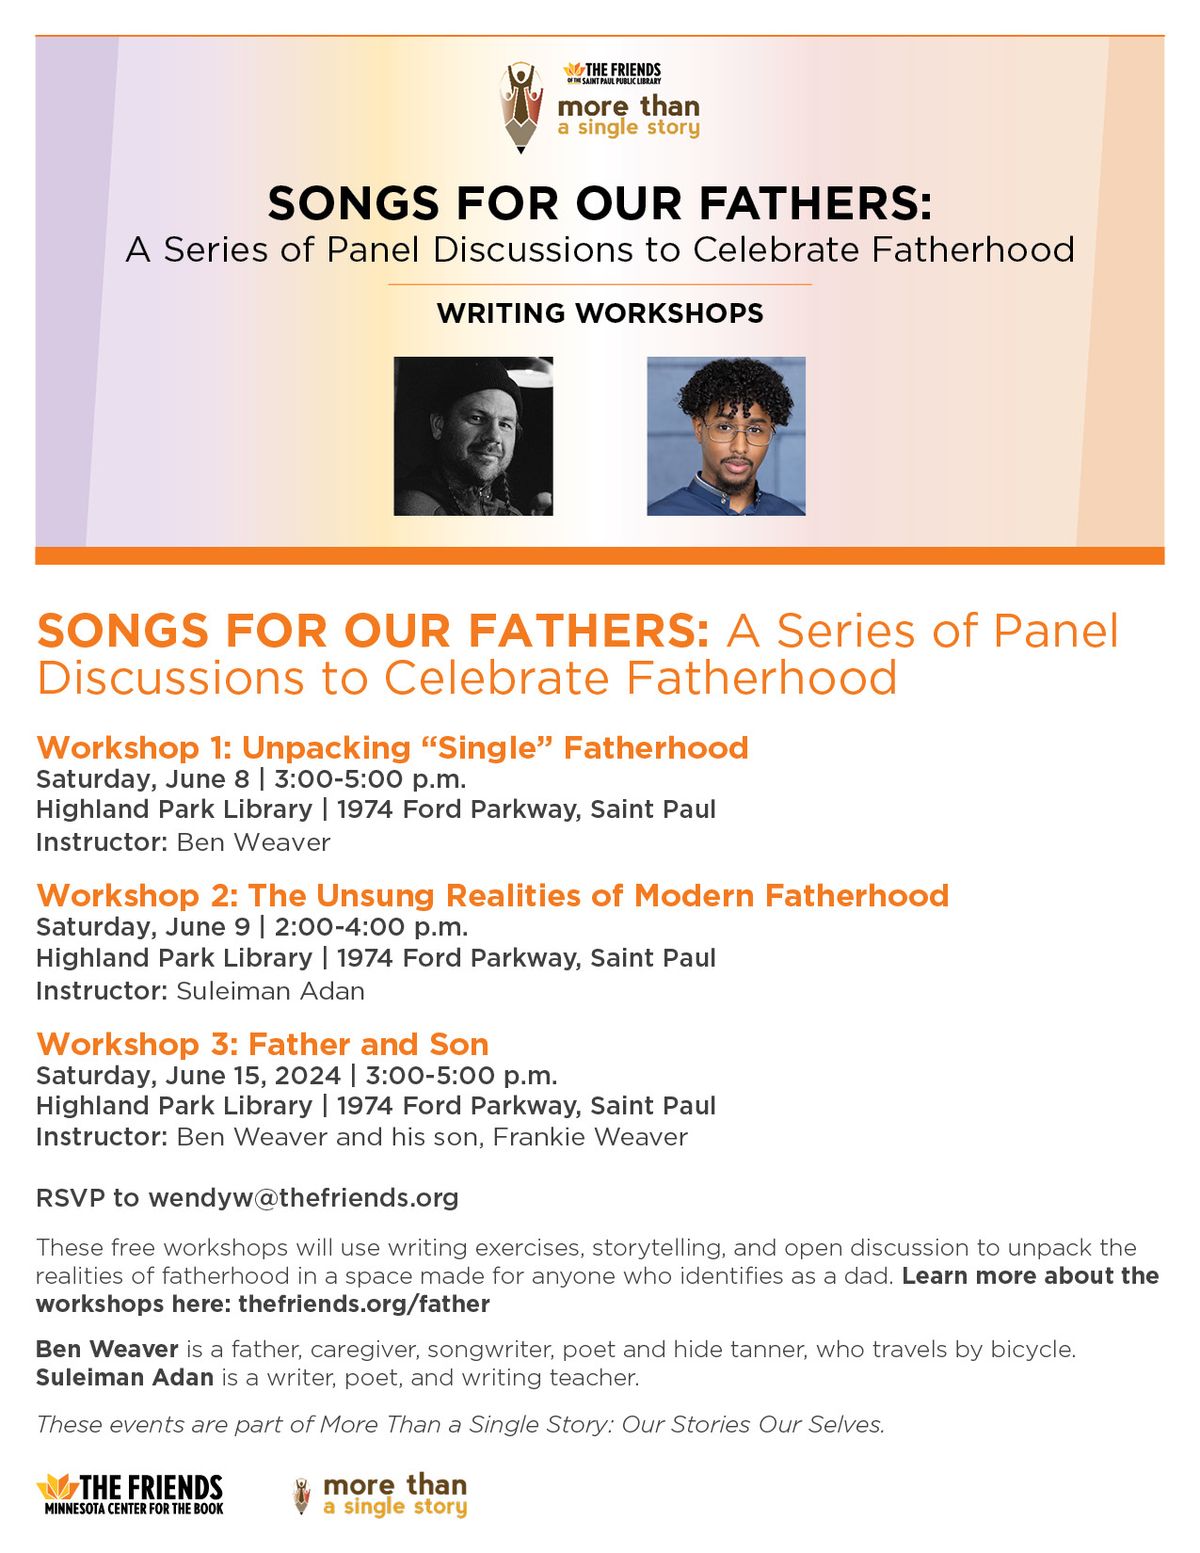 SONGS FOR OUR FATHERS: Writing Workshops